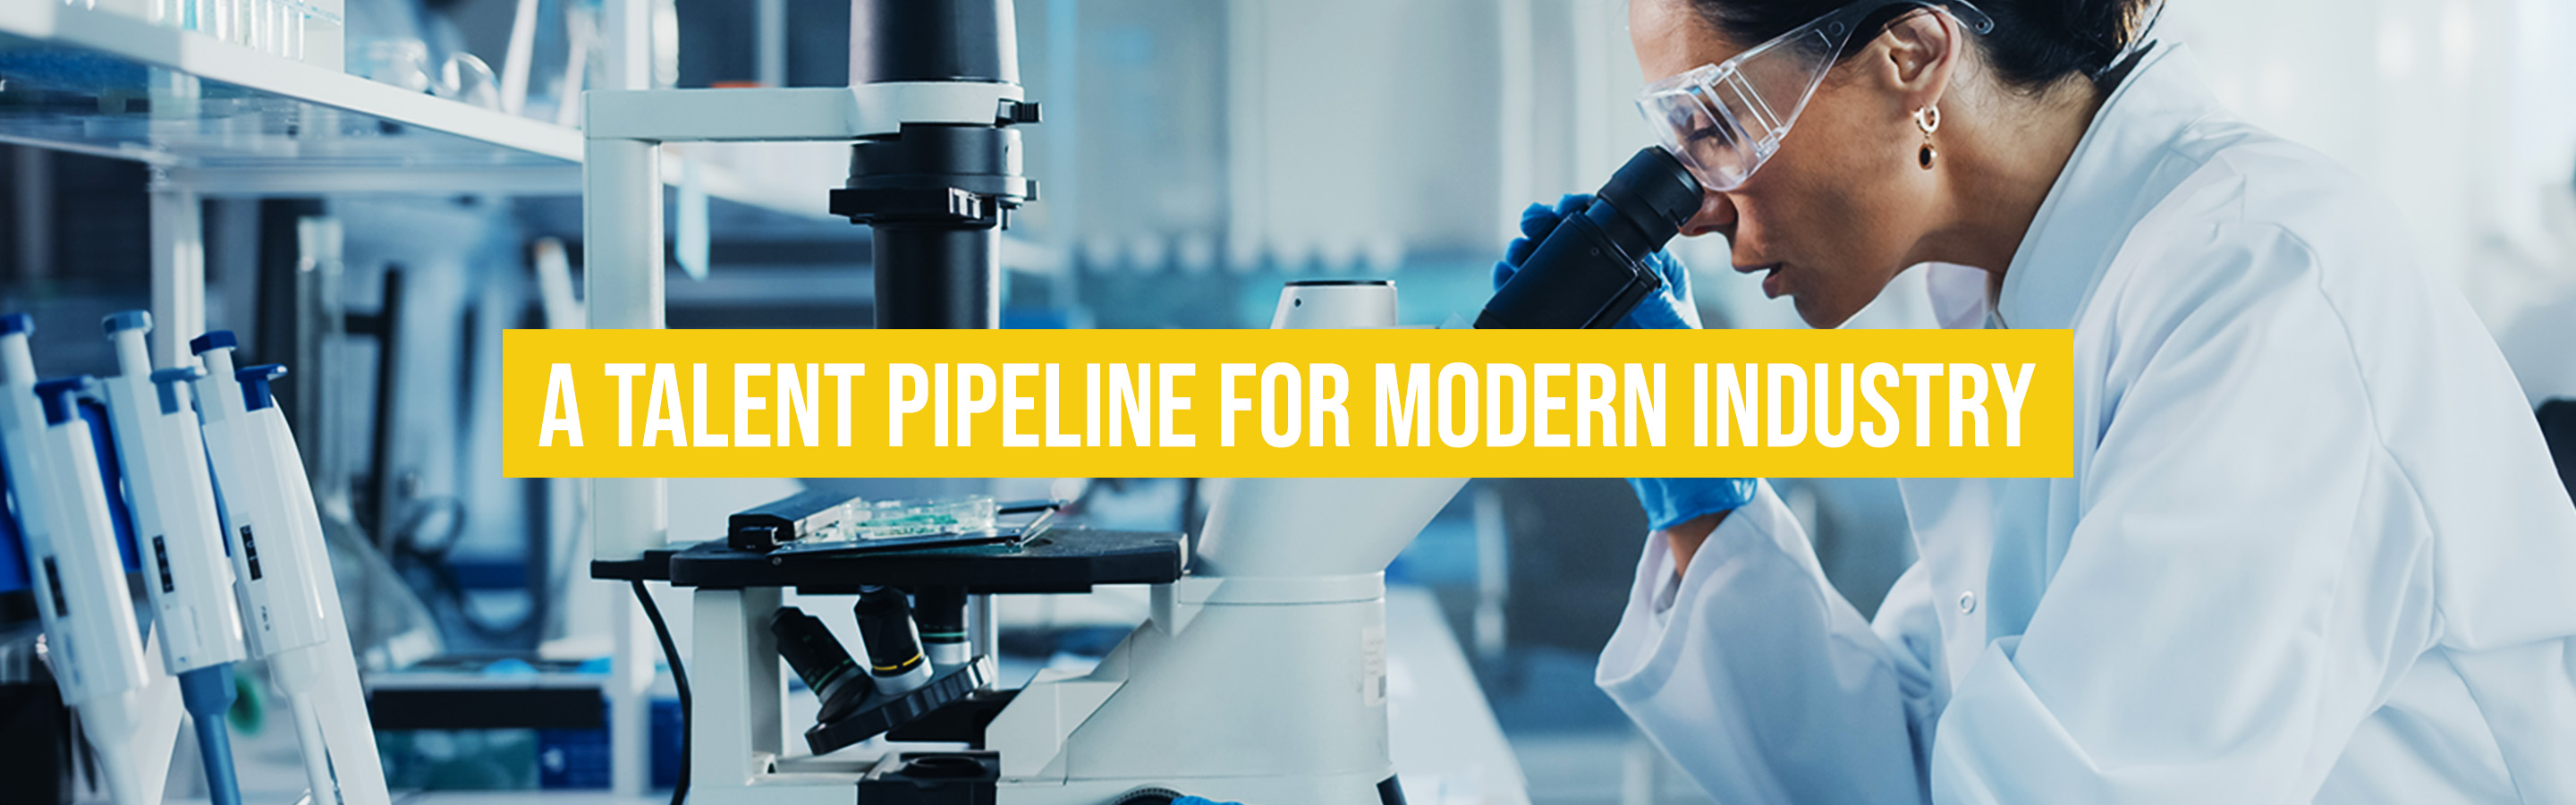 A talent pipeline for modern industry